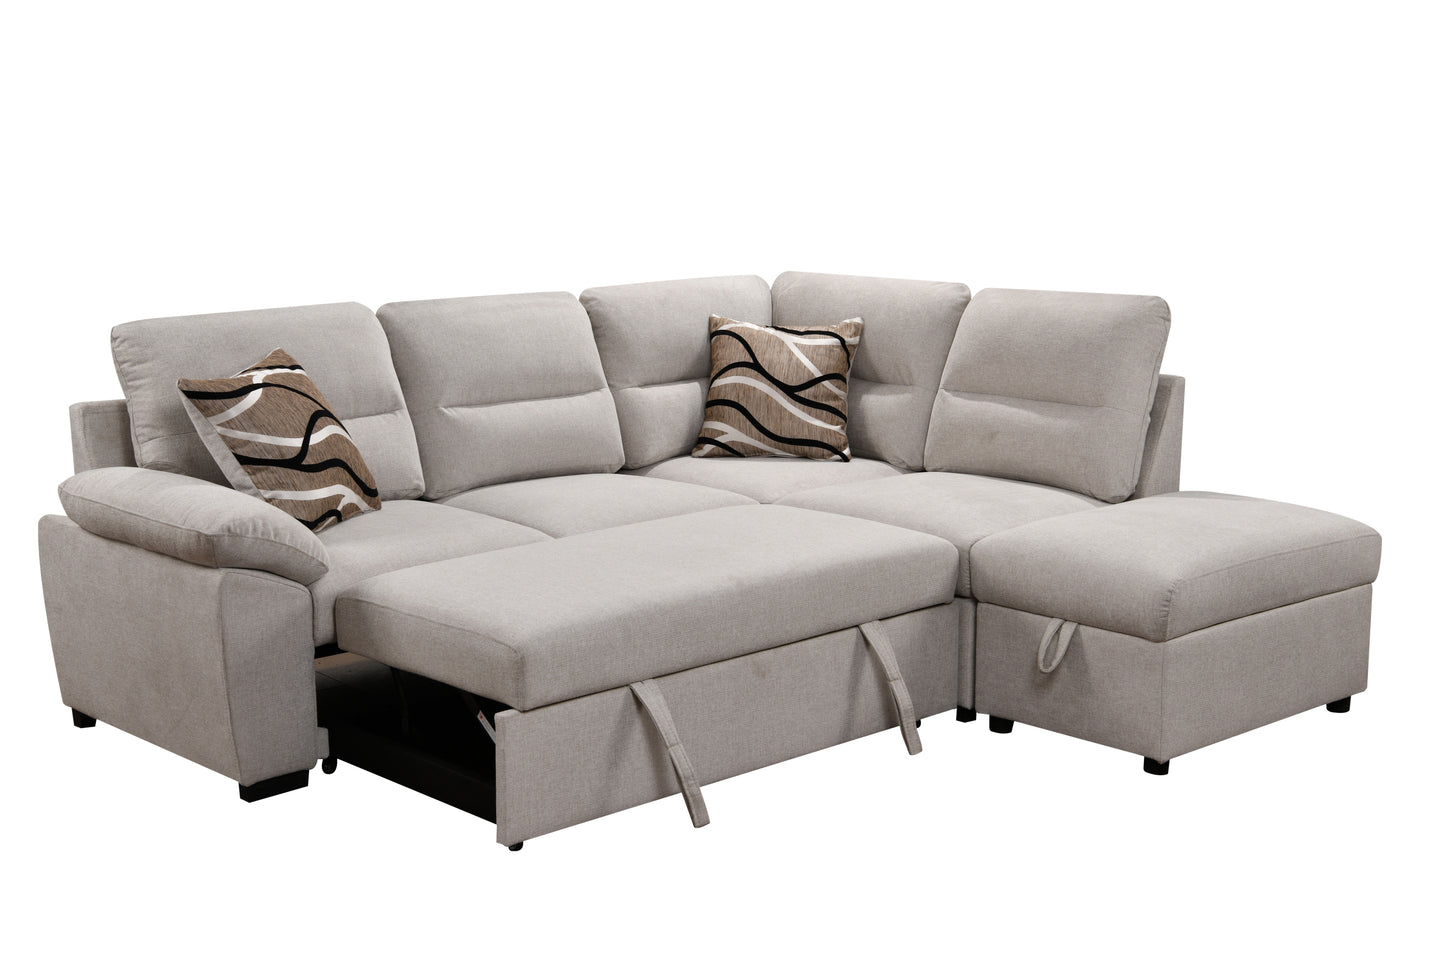 95'' Sectional Sofa with Ultra Soft Back Cushion,Sleeper Sectional Sofa with Pull Out Couch Bed and Storage Ottoman,Beige